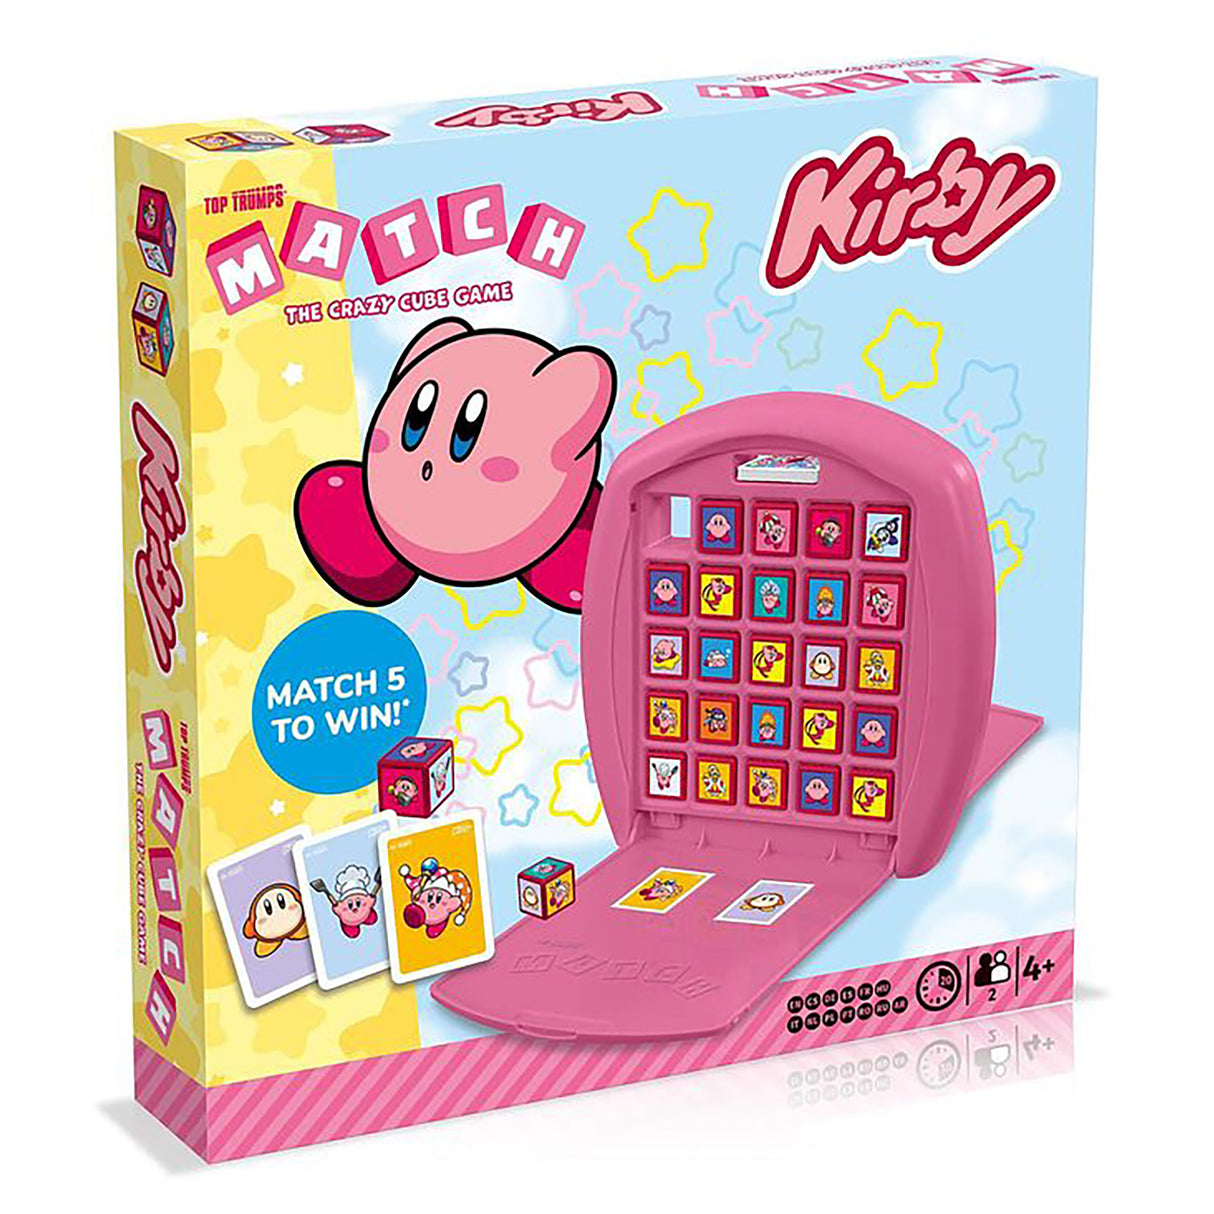 Top Trumps Match Kirby Game